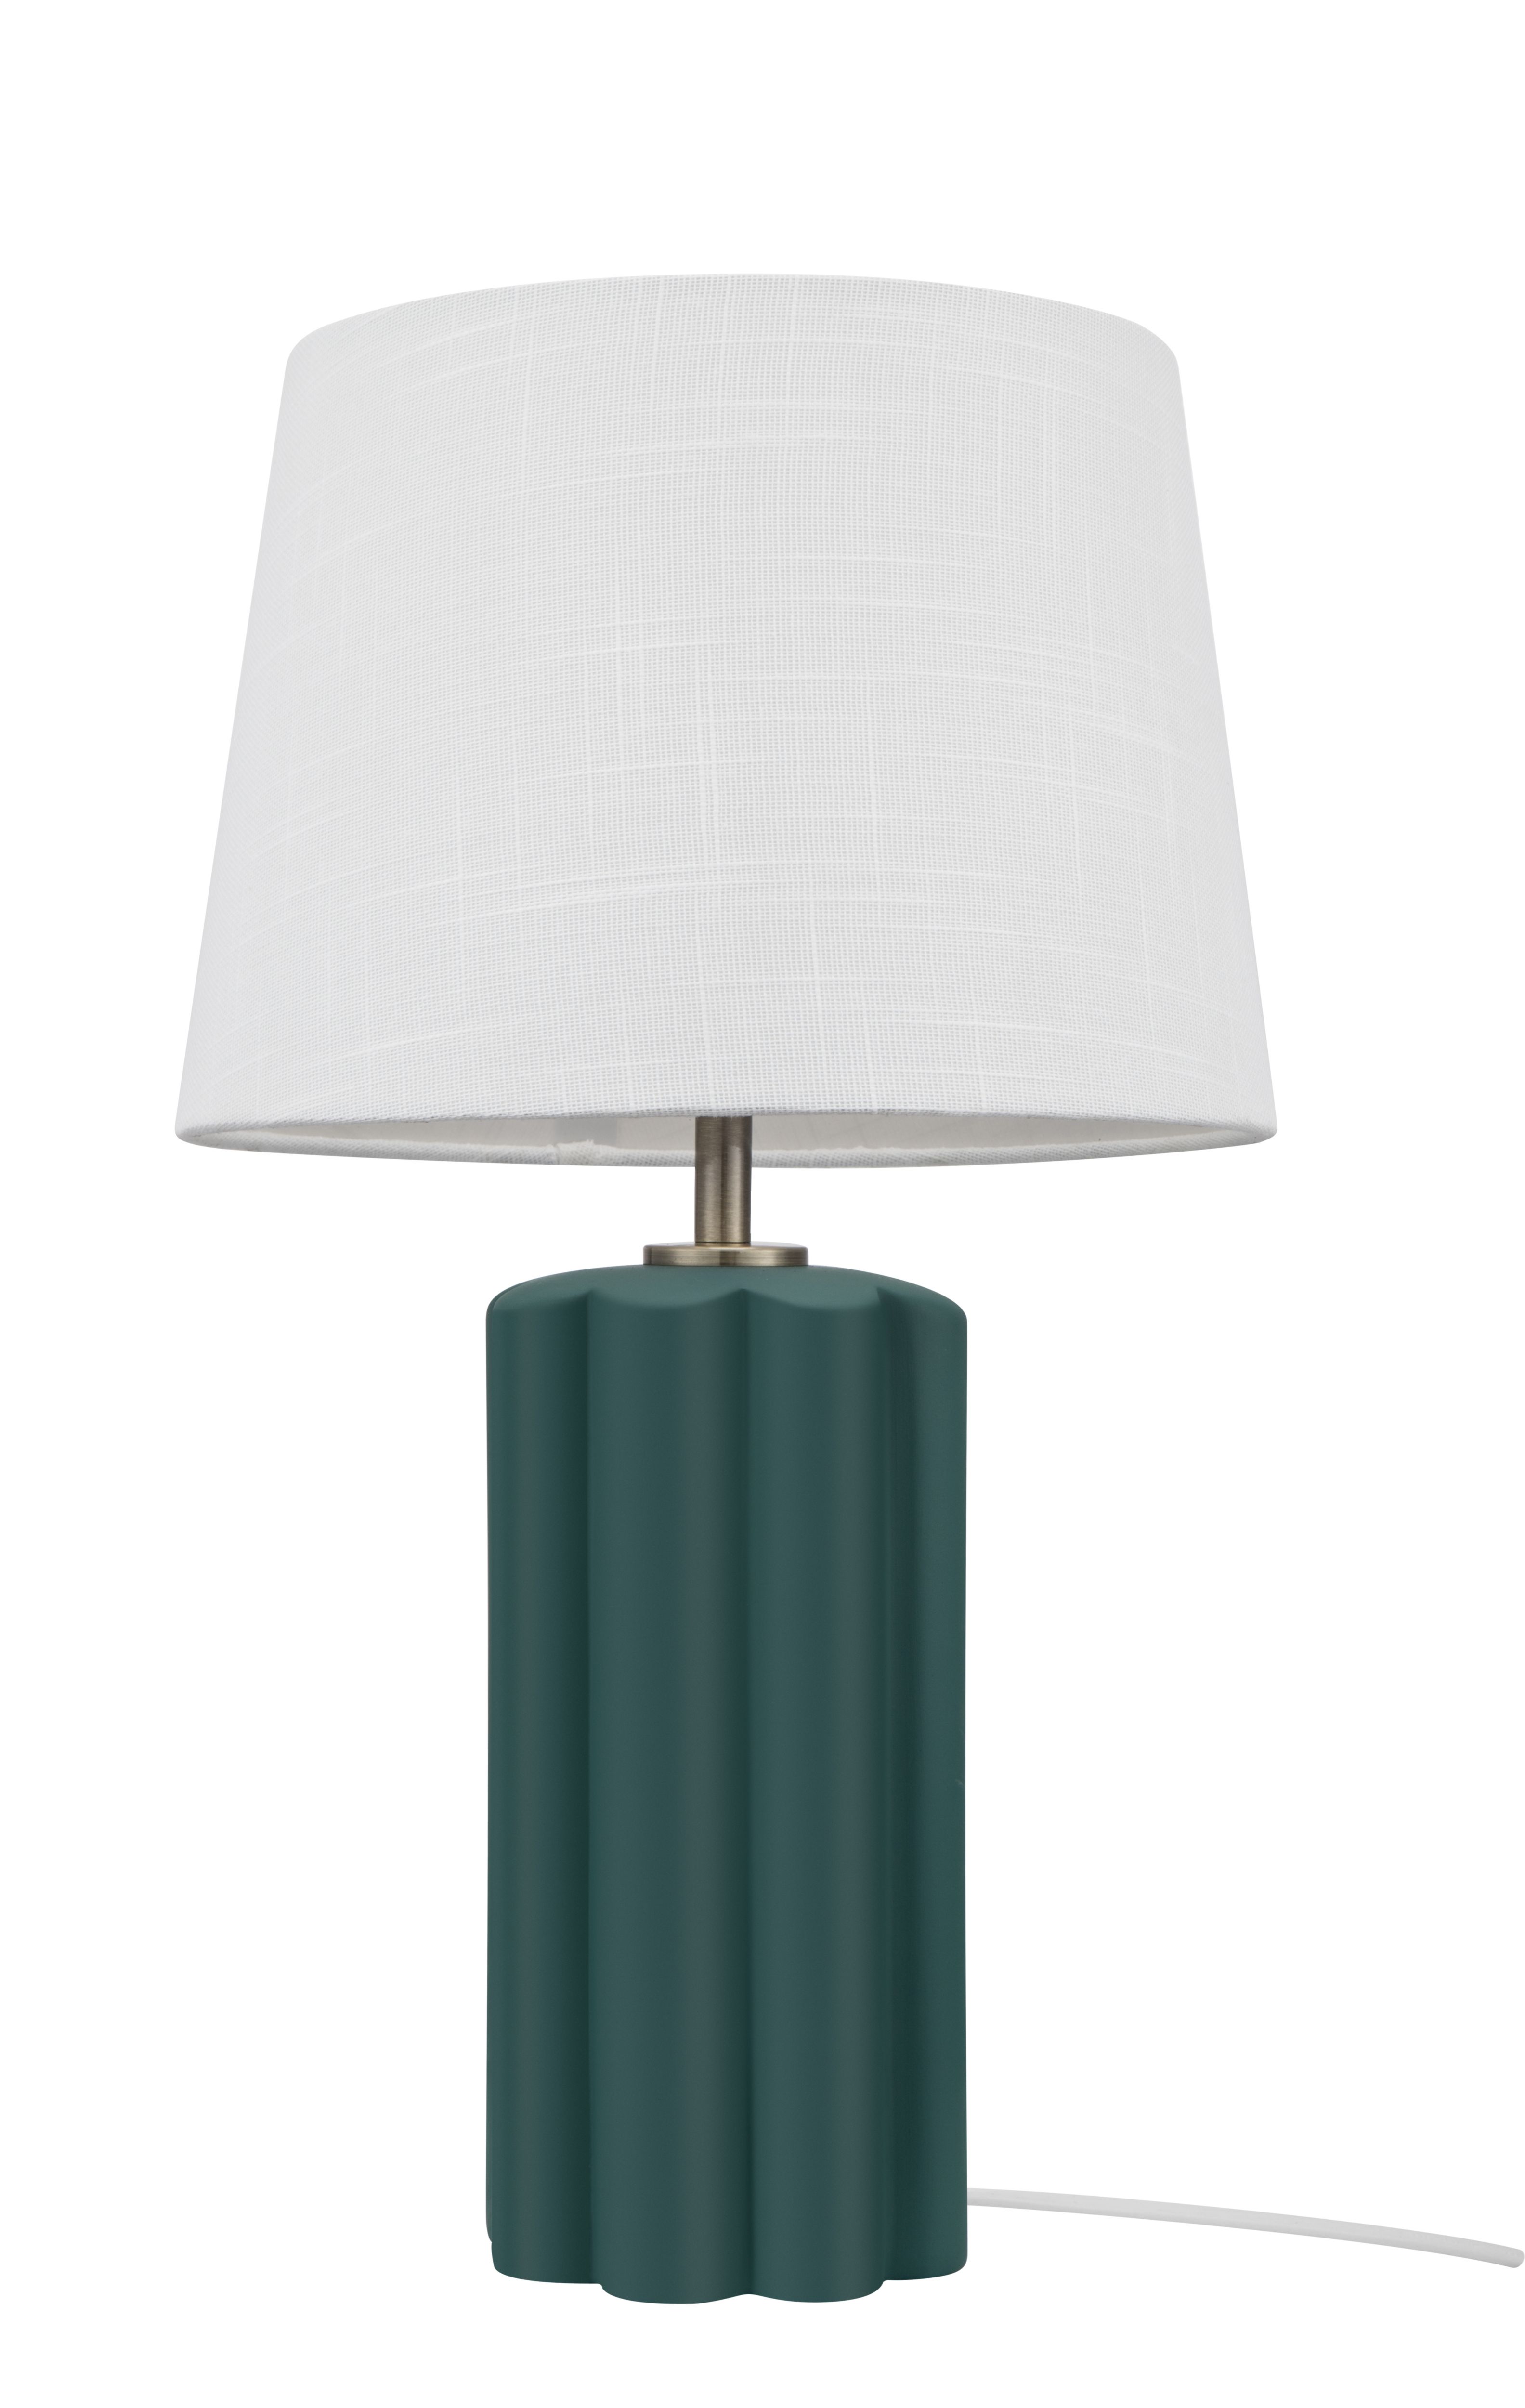 GoodHome Nuneaton Green & white Antique brass effect Straight Table lamp